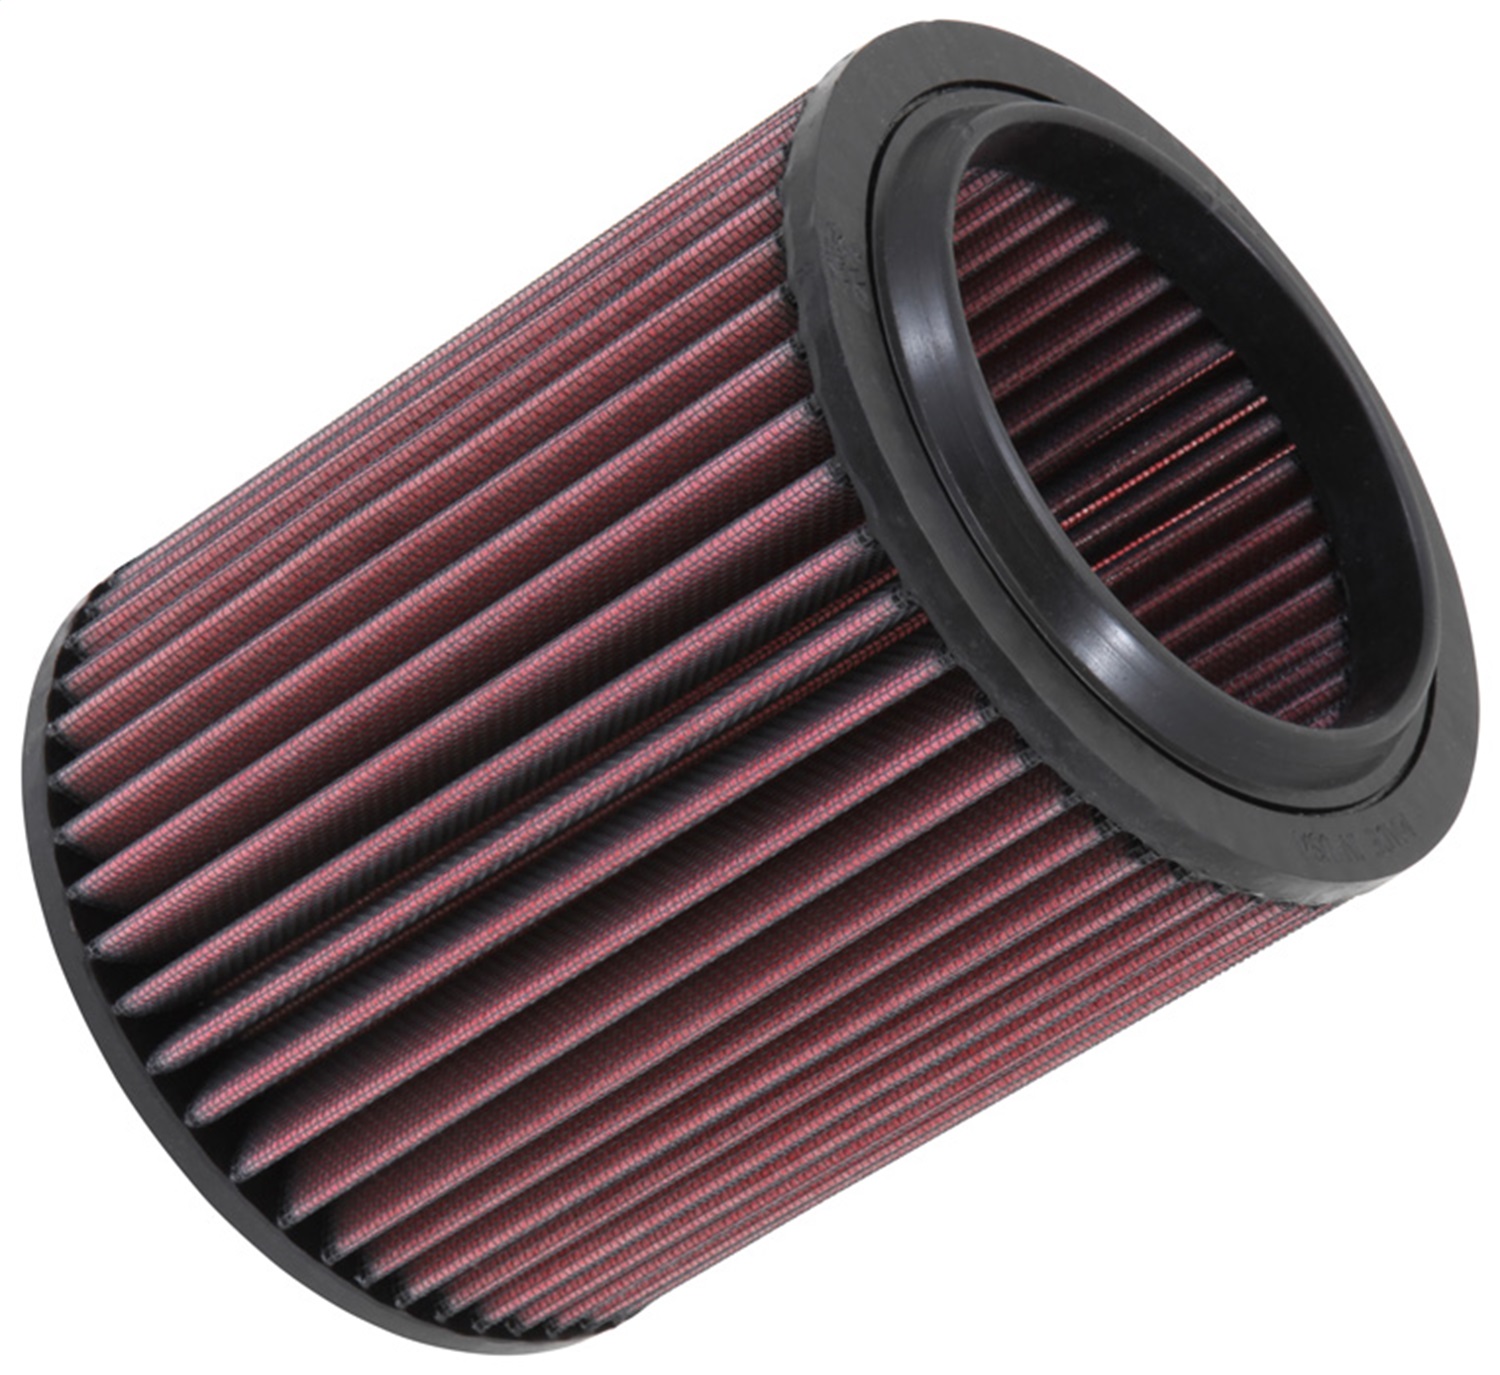 K&N Filters K&N Filters E-0775 Air Filter Fits 04-10 A8 Quattro S8